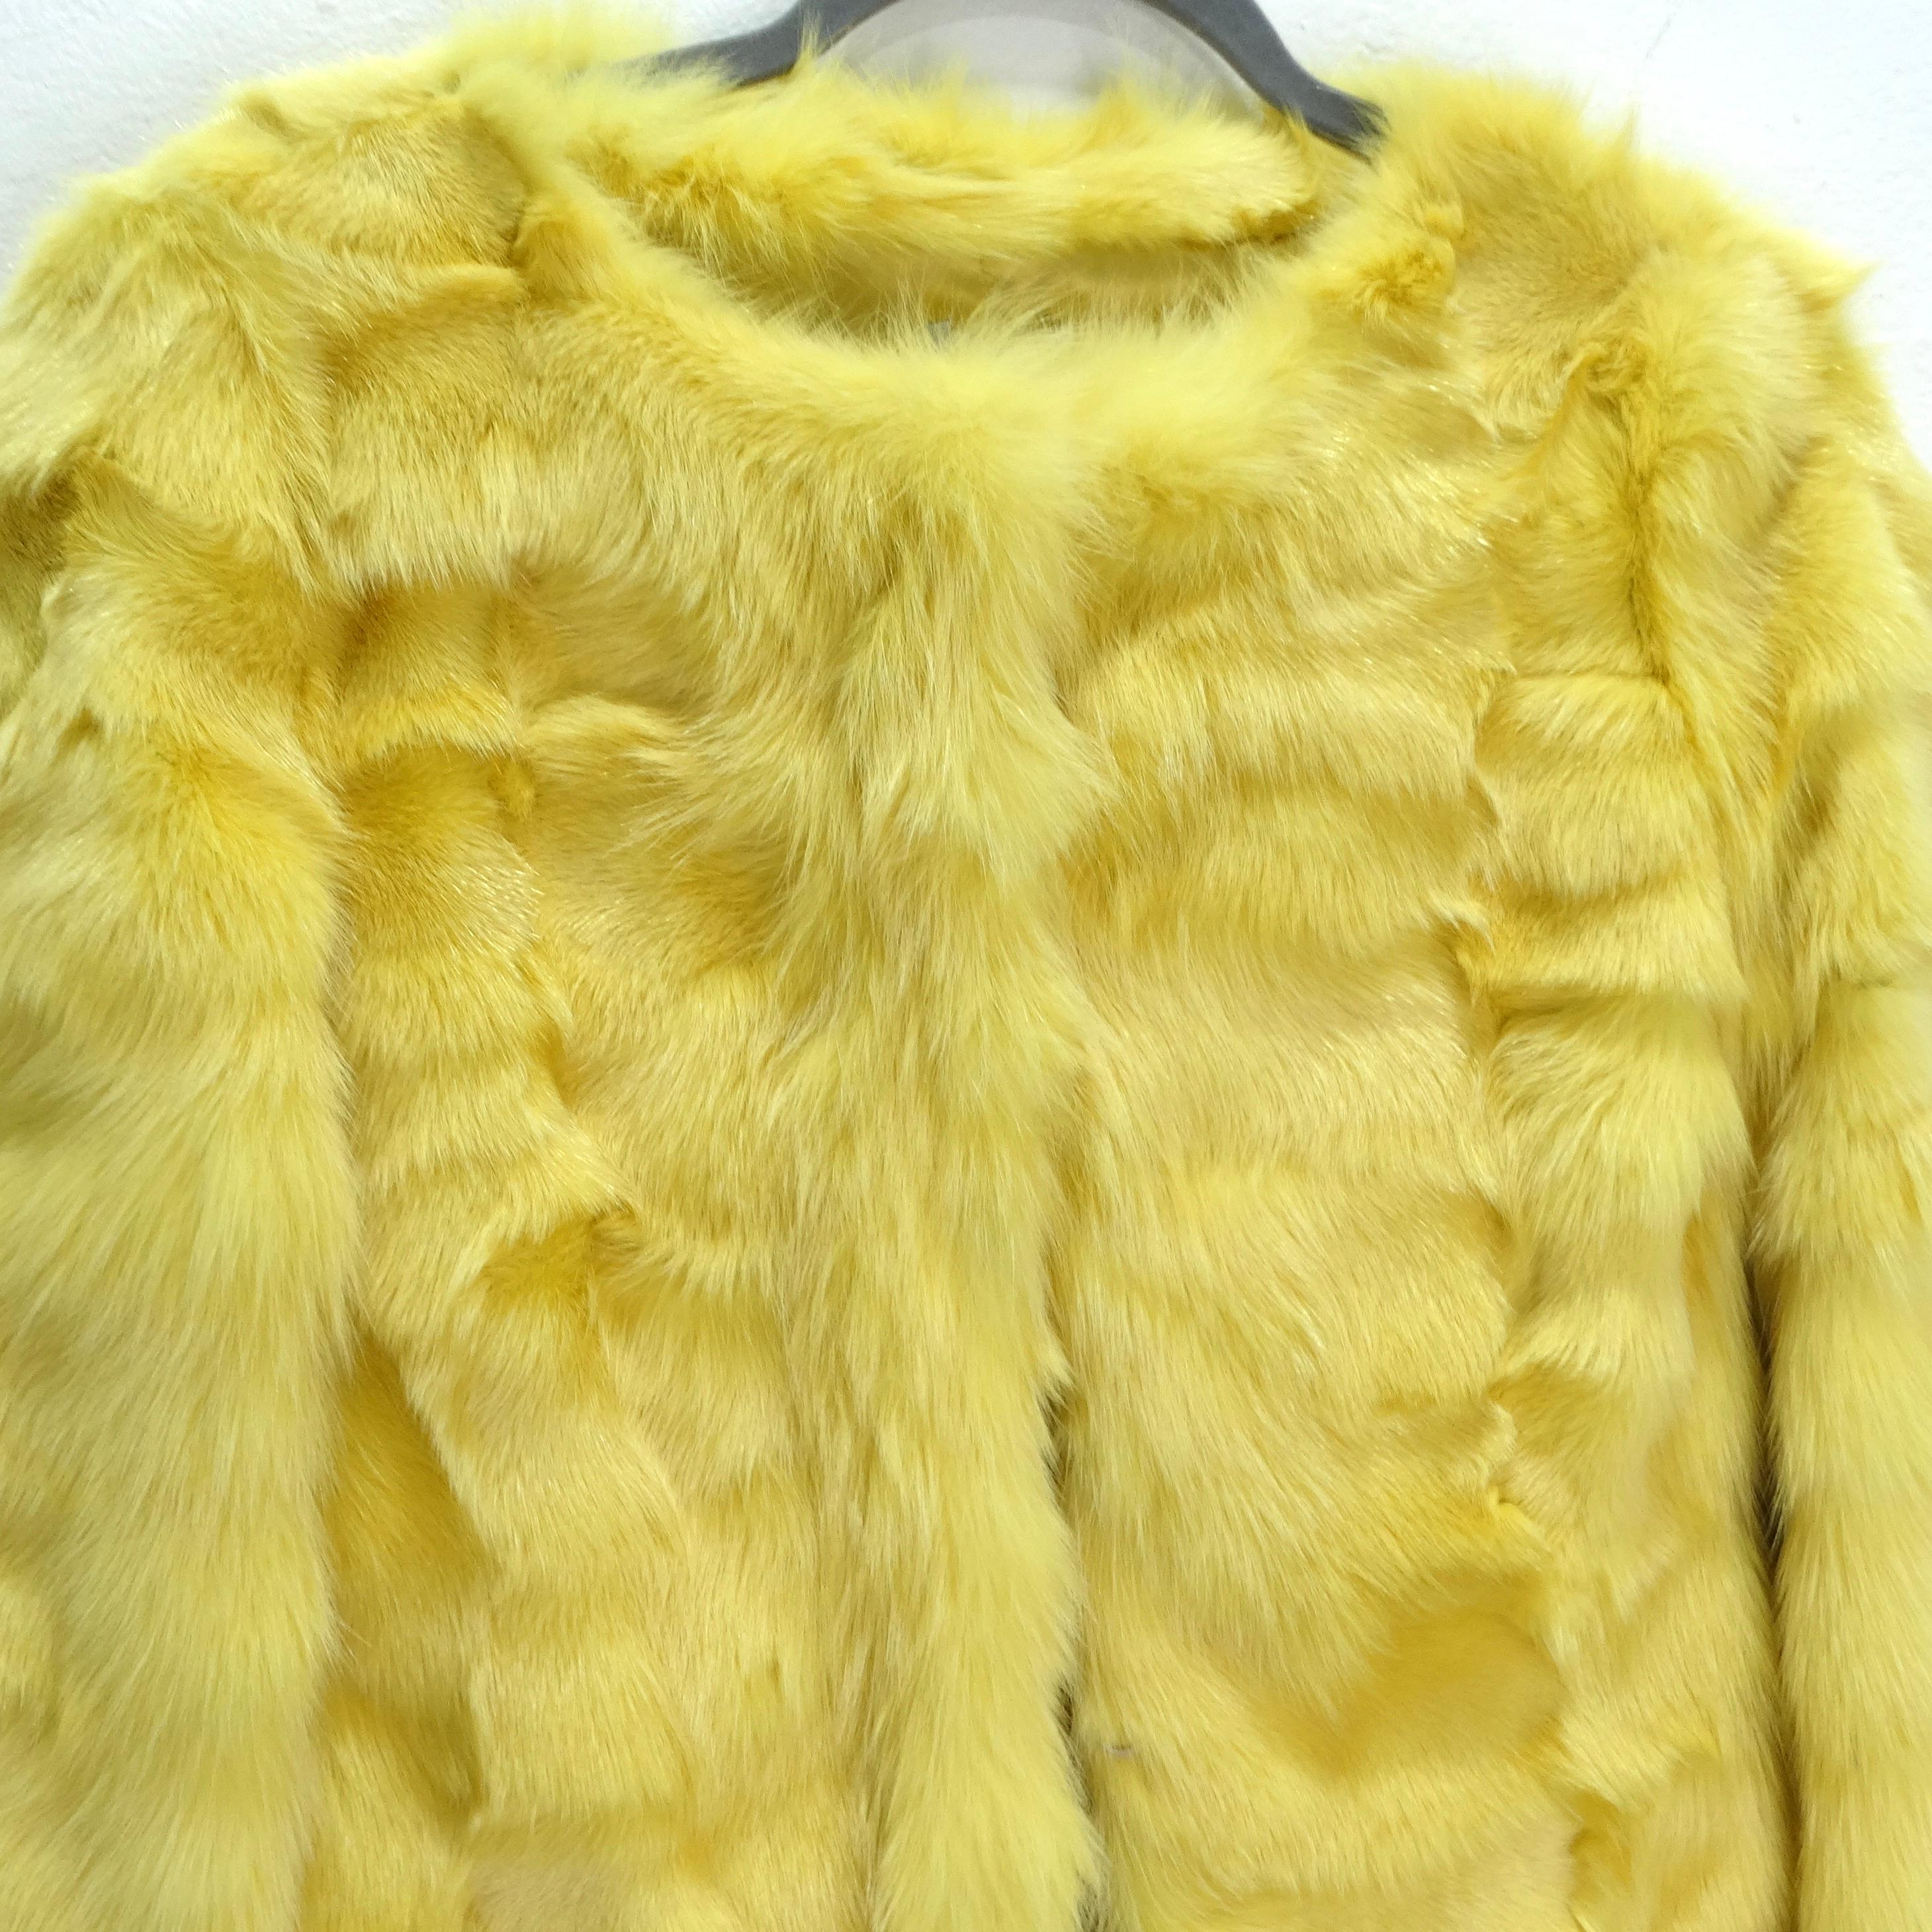 Introducing the Philosophy di Alberta Ferretti 1990s Yellow Fox Fur Coat—a stunning and bold expression of luxury and style. This mid-length coat is more than just outerwear; it's a wearable masterpiece crafted from vibrant yellow fox fur that